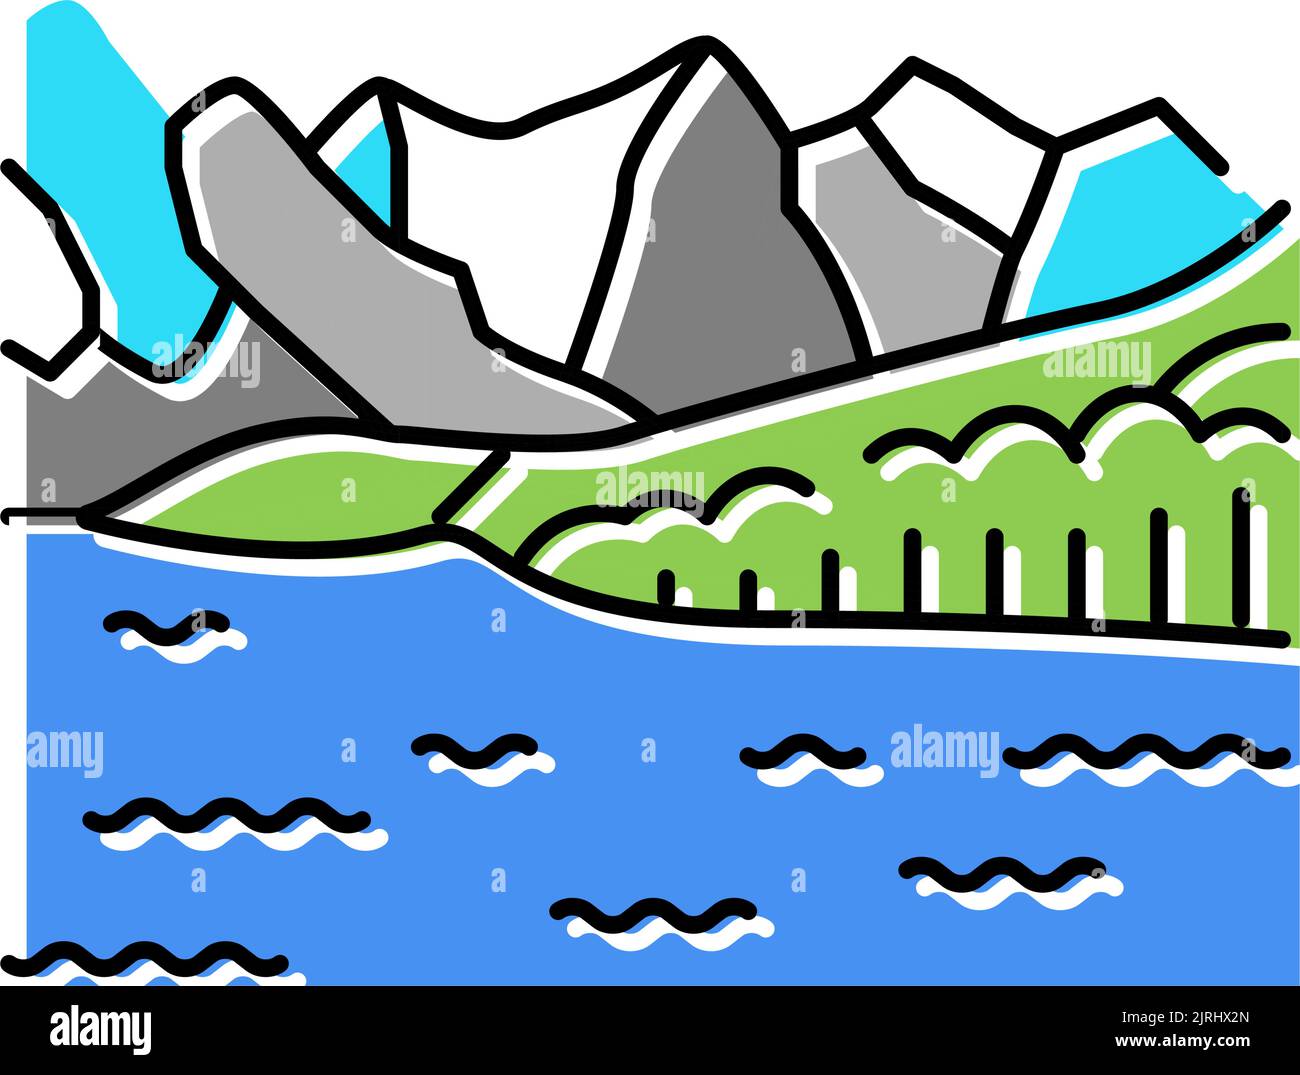 banff national park color icon vector illustration Stock Vector